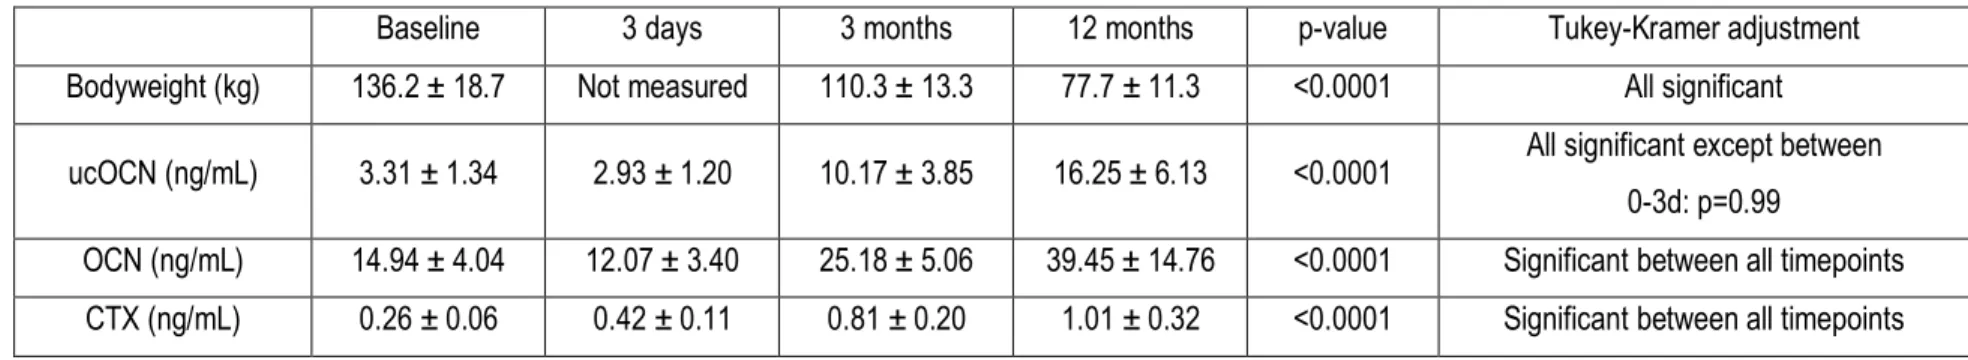 Table 1. Descriptive statistics of bodyweight, ucOCN and bone turnover markers before and at 3 days, 3 months and 12 months after BPD